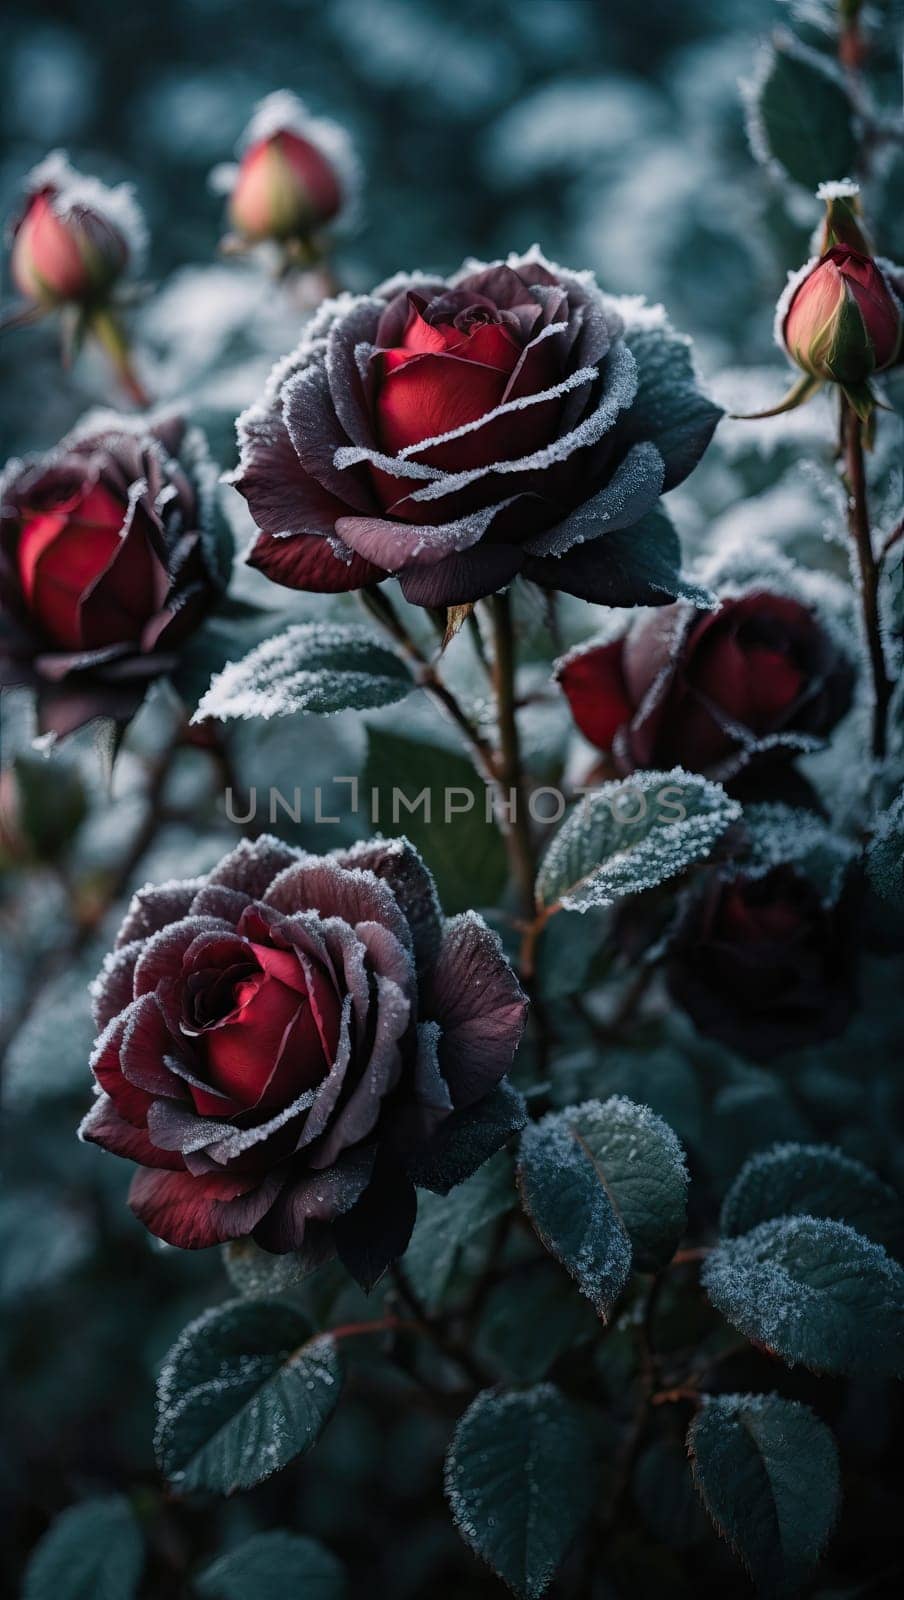 Frozen red roses, Real photo by applesstock